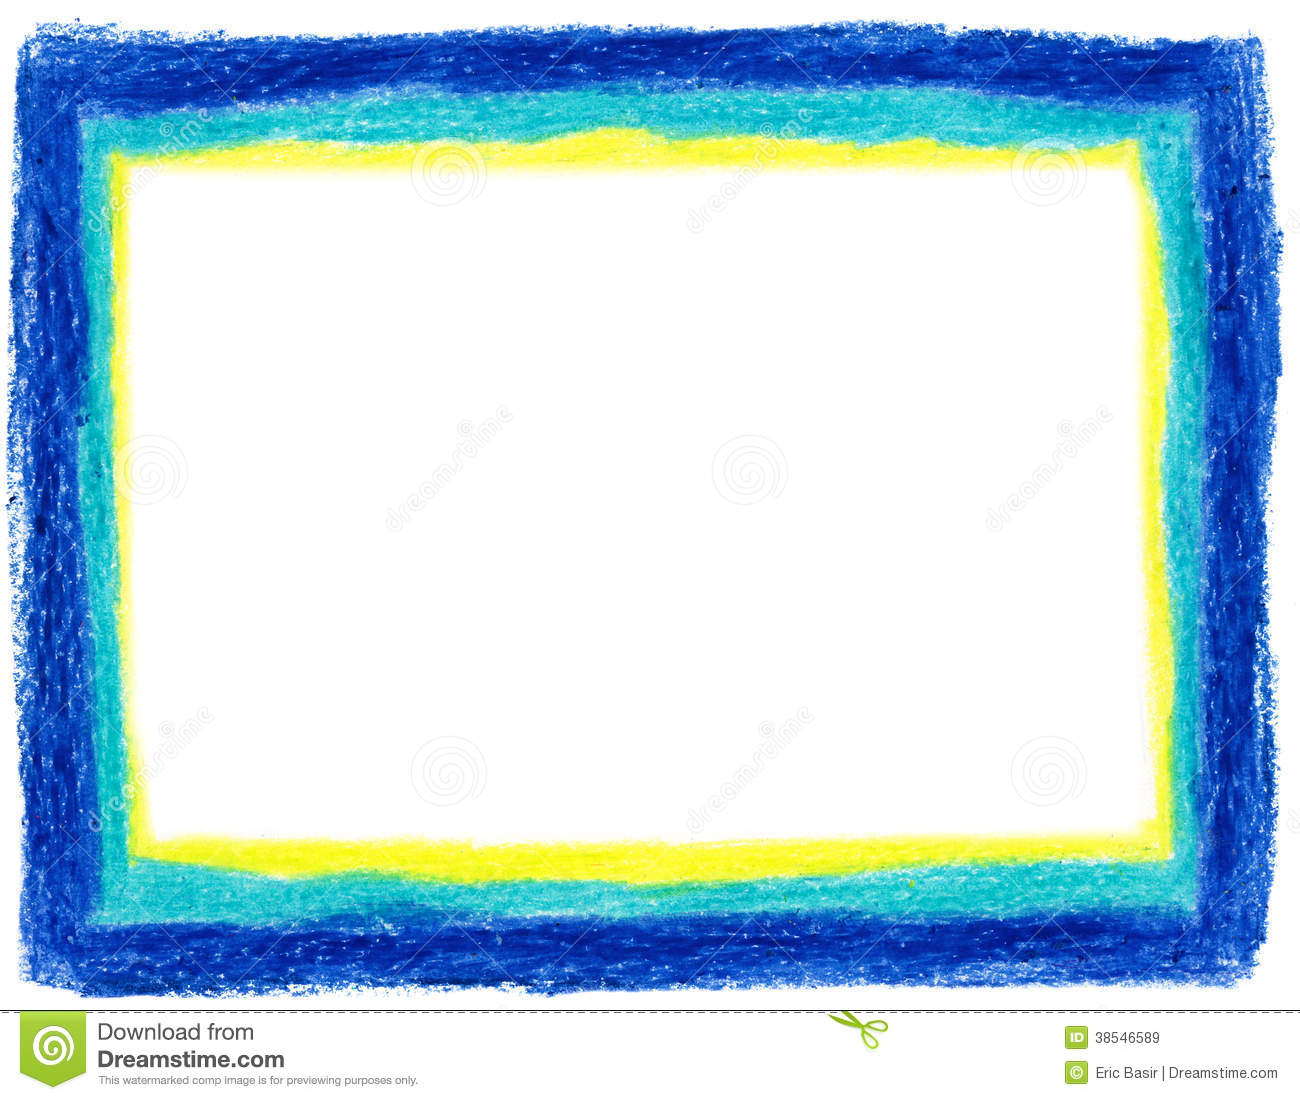 Blue And Yellow Crayon Frame Royalty Free Stock Images   Image    